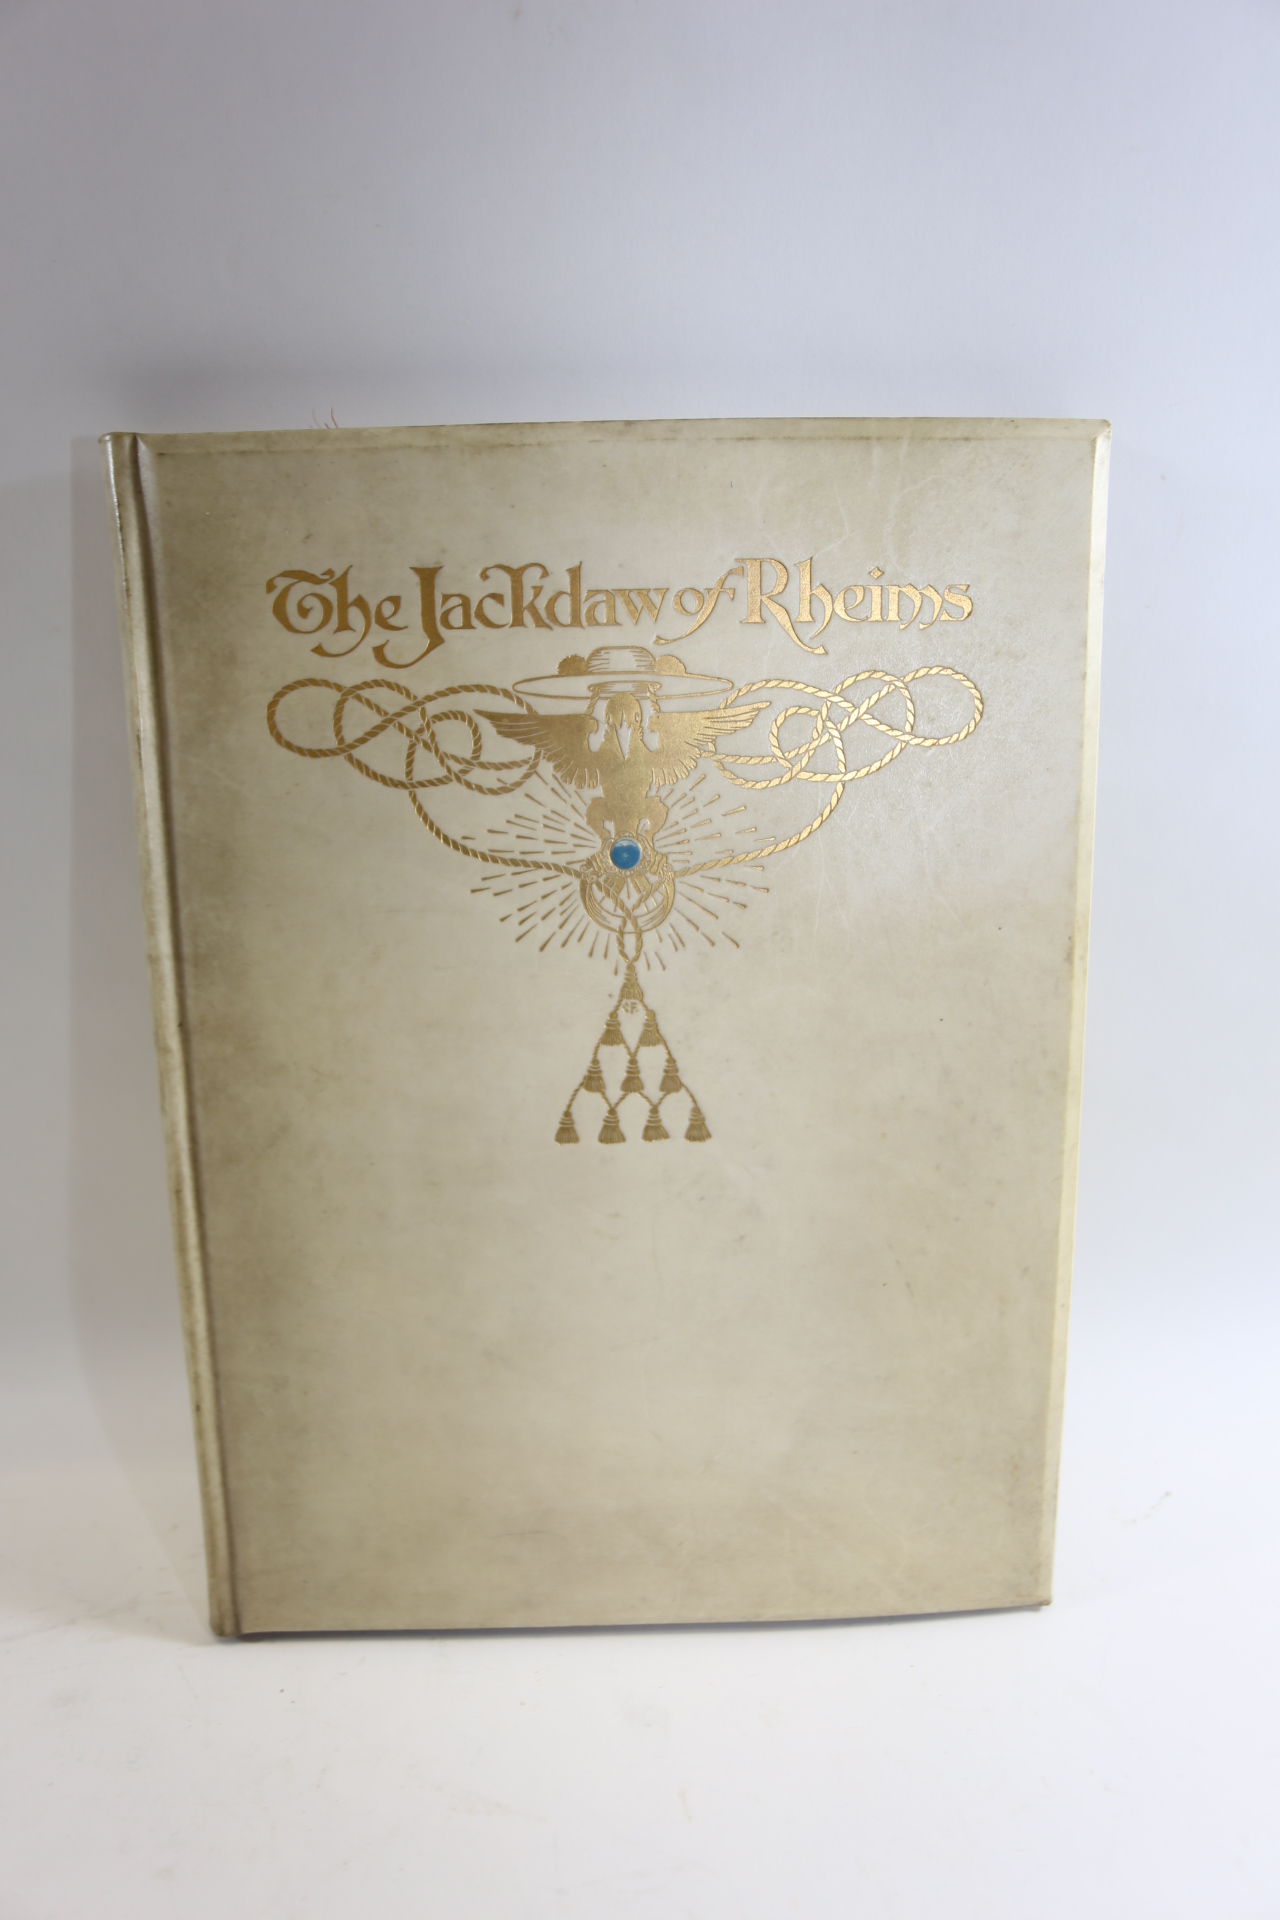 A LIMITED EDITION THE JACKDAW OF RHEIMS, No 9/100, by Thomas Ingoldsby, illustrations by C. Folkard,